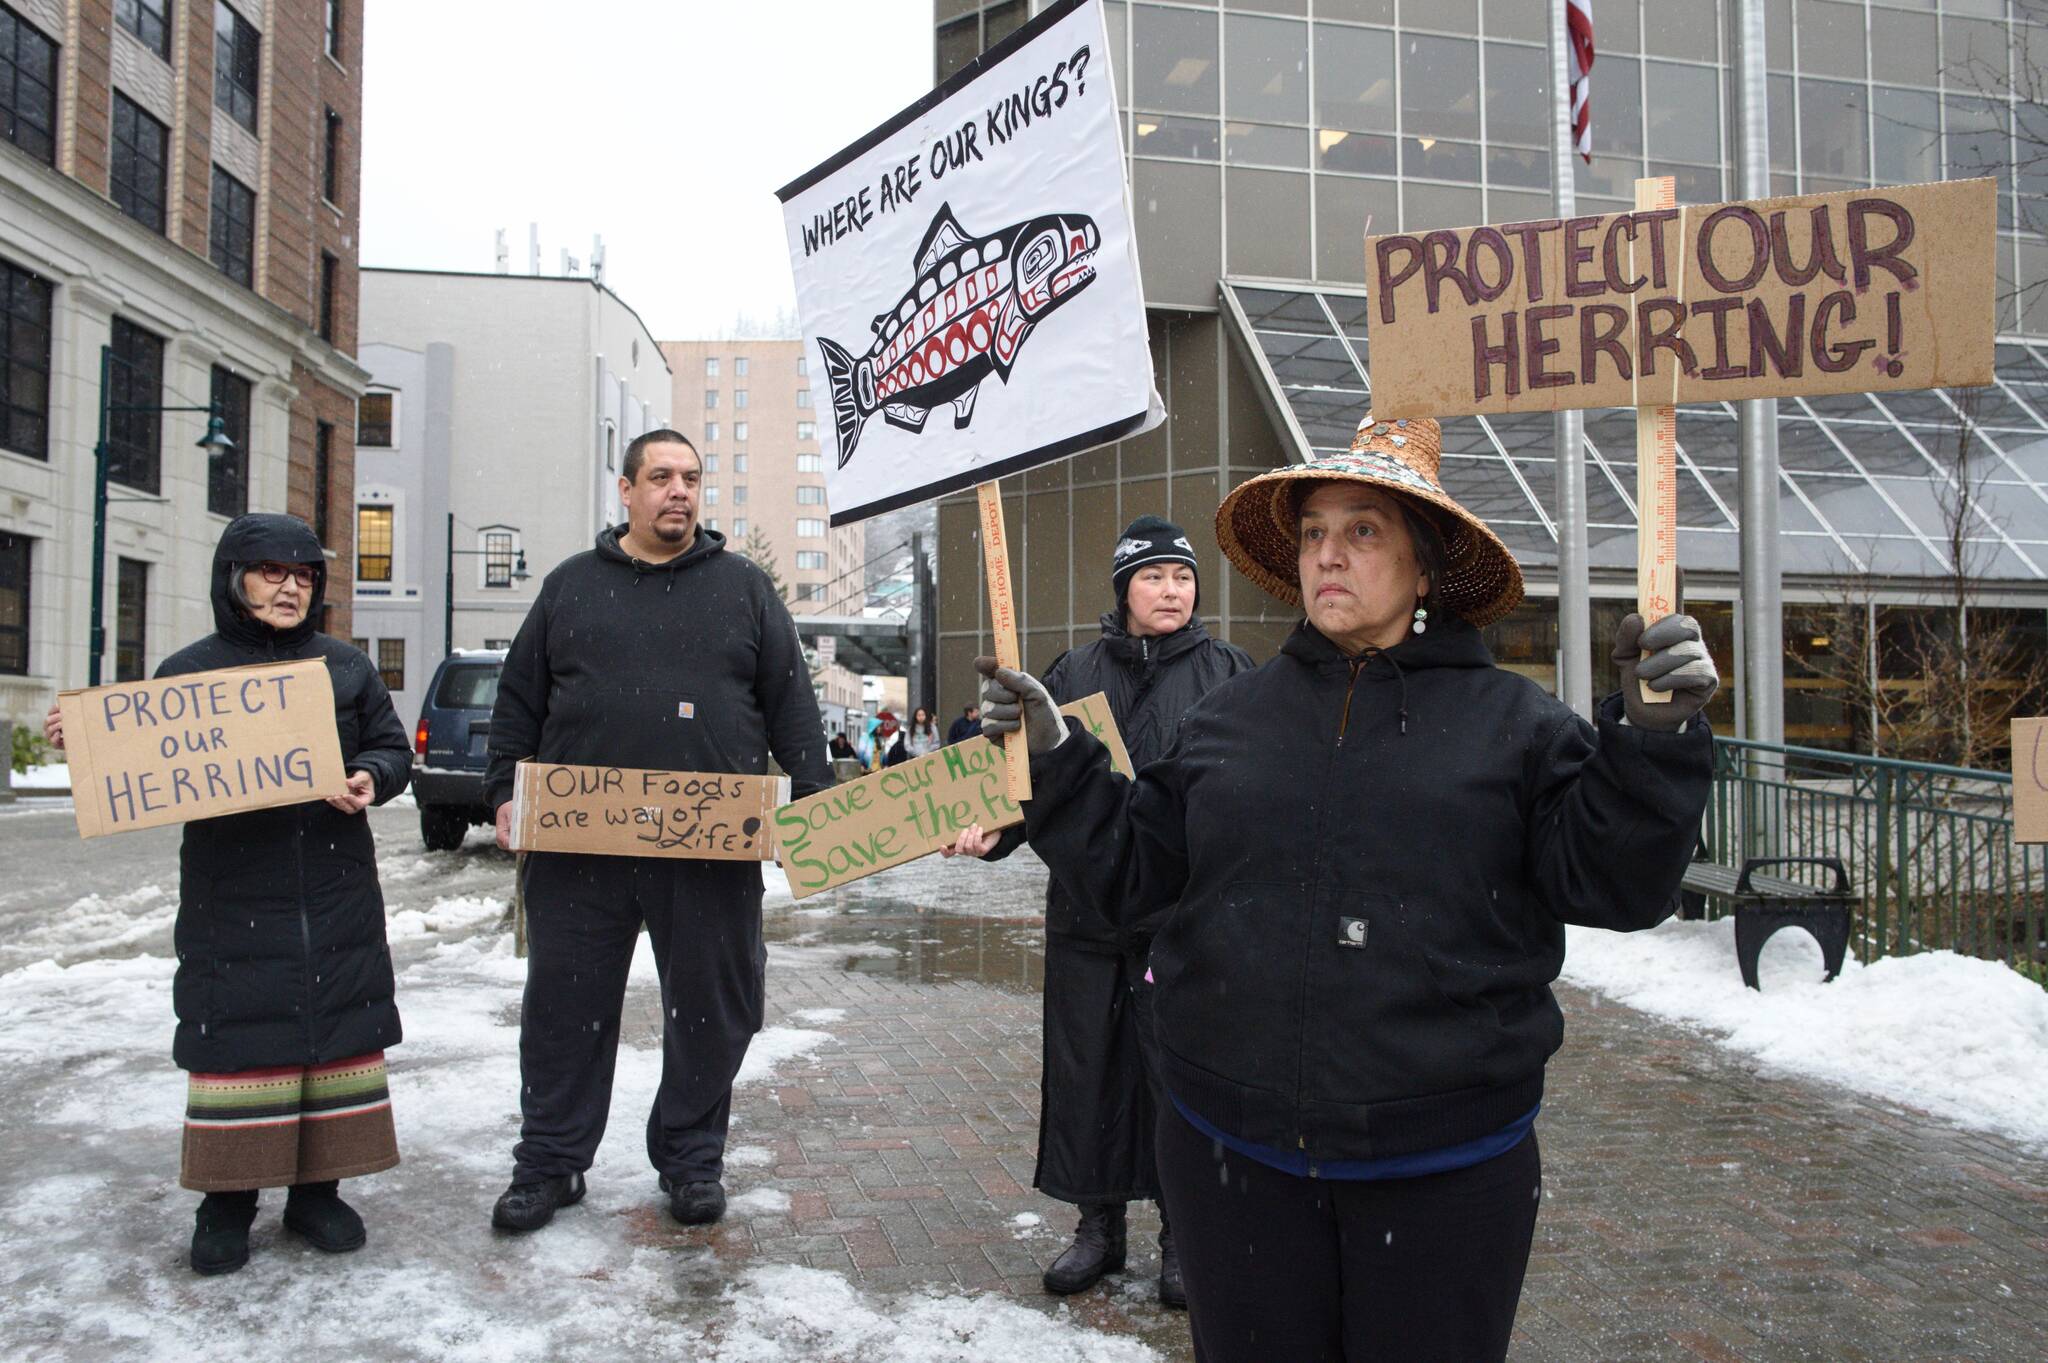 Nancy Keen, right, Vivian Mork, Marvin Willard and Rosita Worl, left, protest outside the Dimond Courthouse as a court hearing between the Sitka Tribe of Alaska and the Department of Fish and Game on herring limits in Sitka Sound takes place inside on Tuesday, Feb. 18, 2019. (Michael Penn / Juneau Empire File)